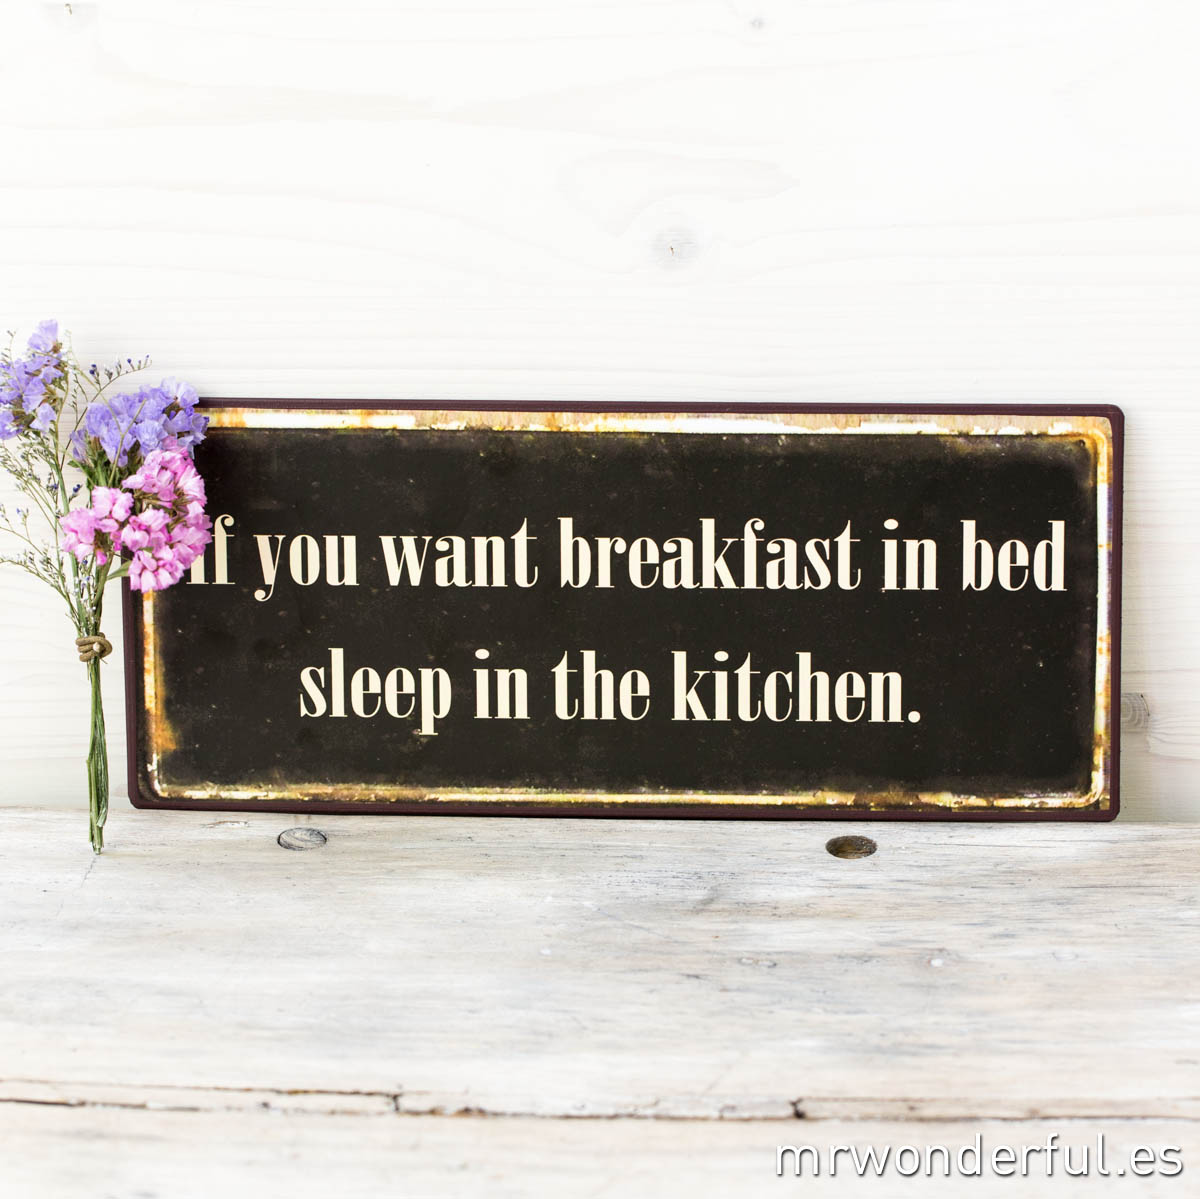 166033_pizarra-metal_if-you-want-breakfast-in-bed-sleep-in-the-kitchen-5